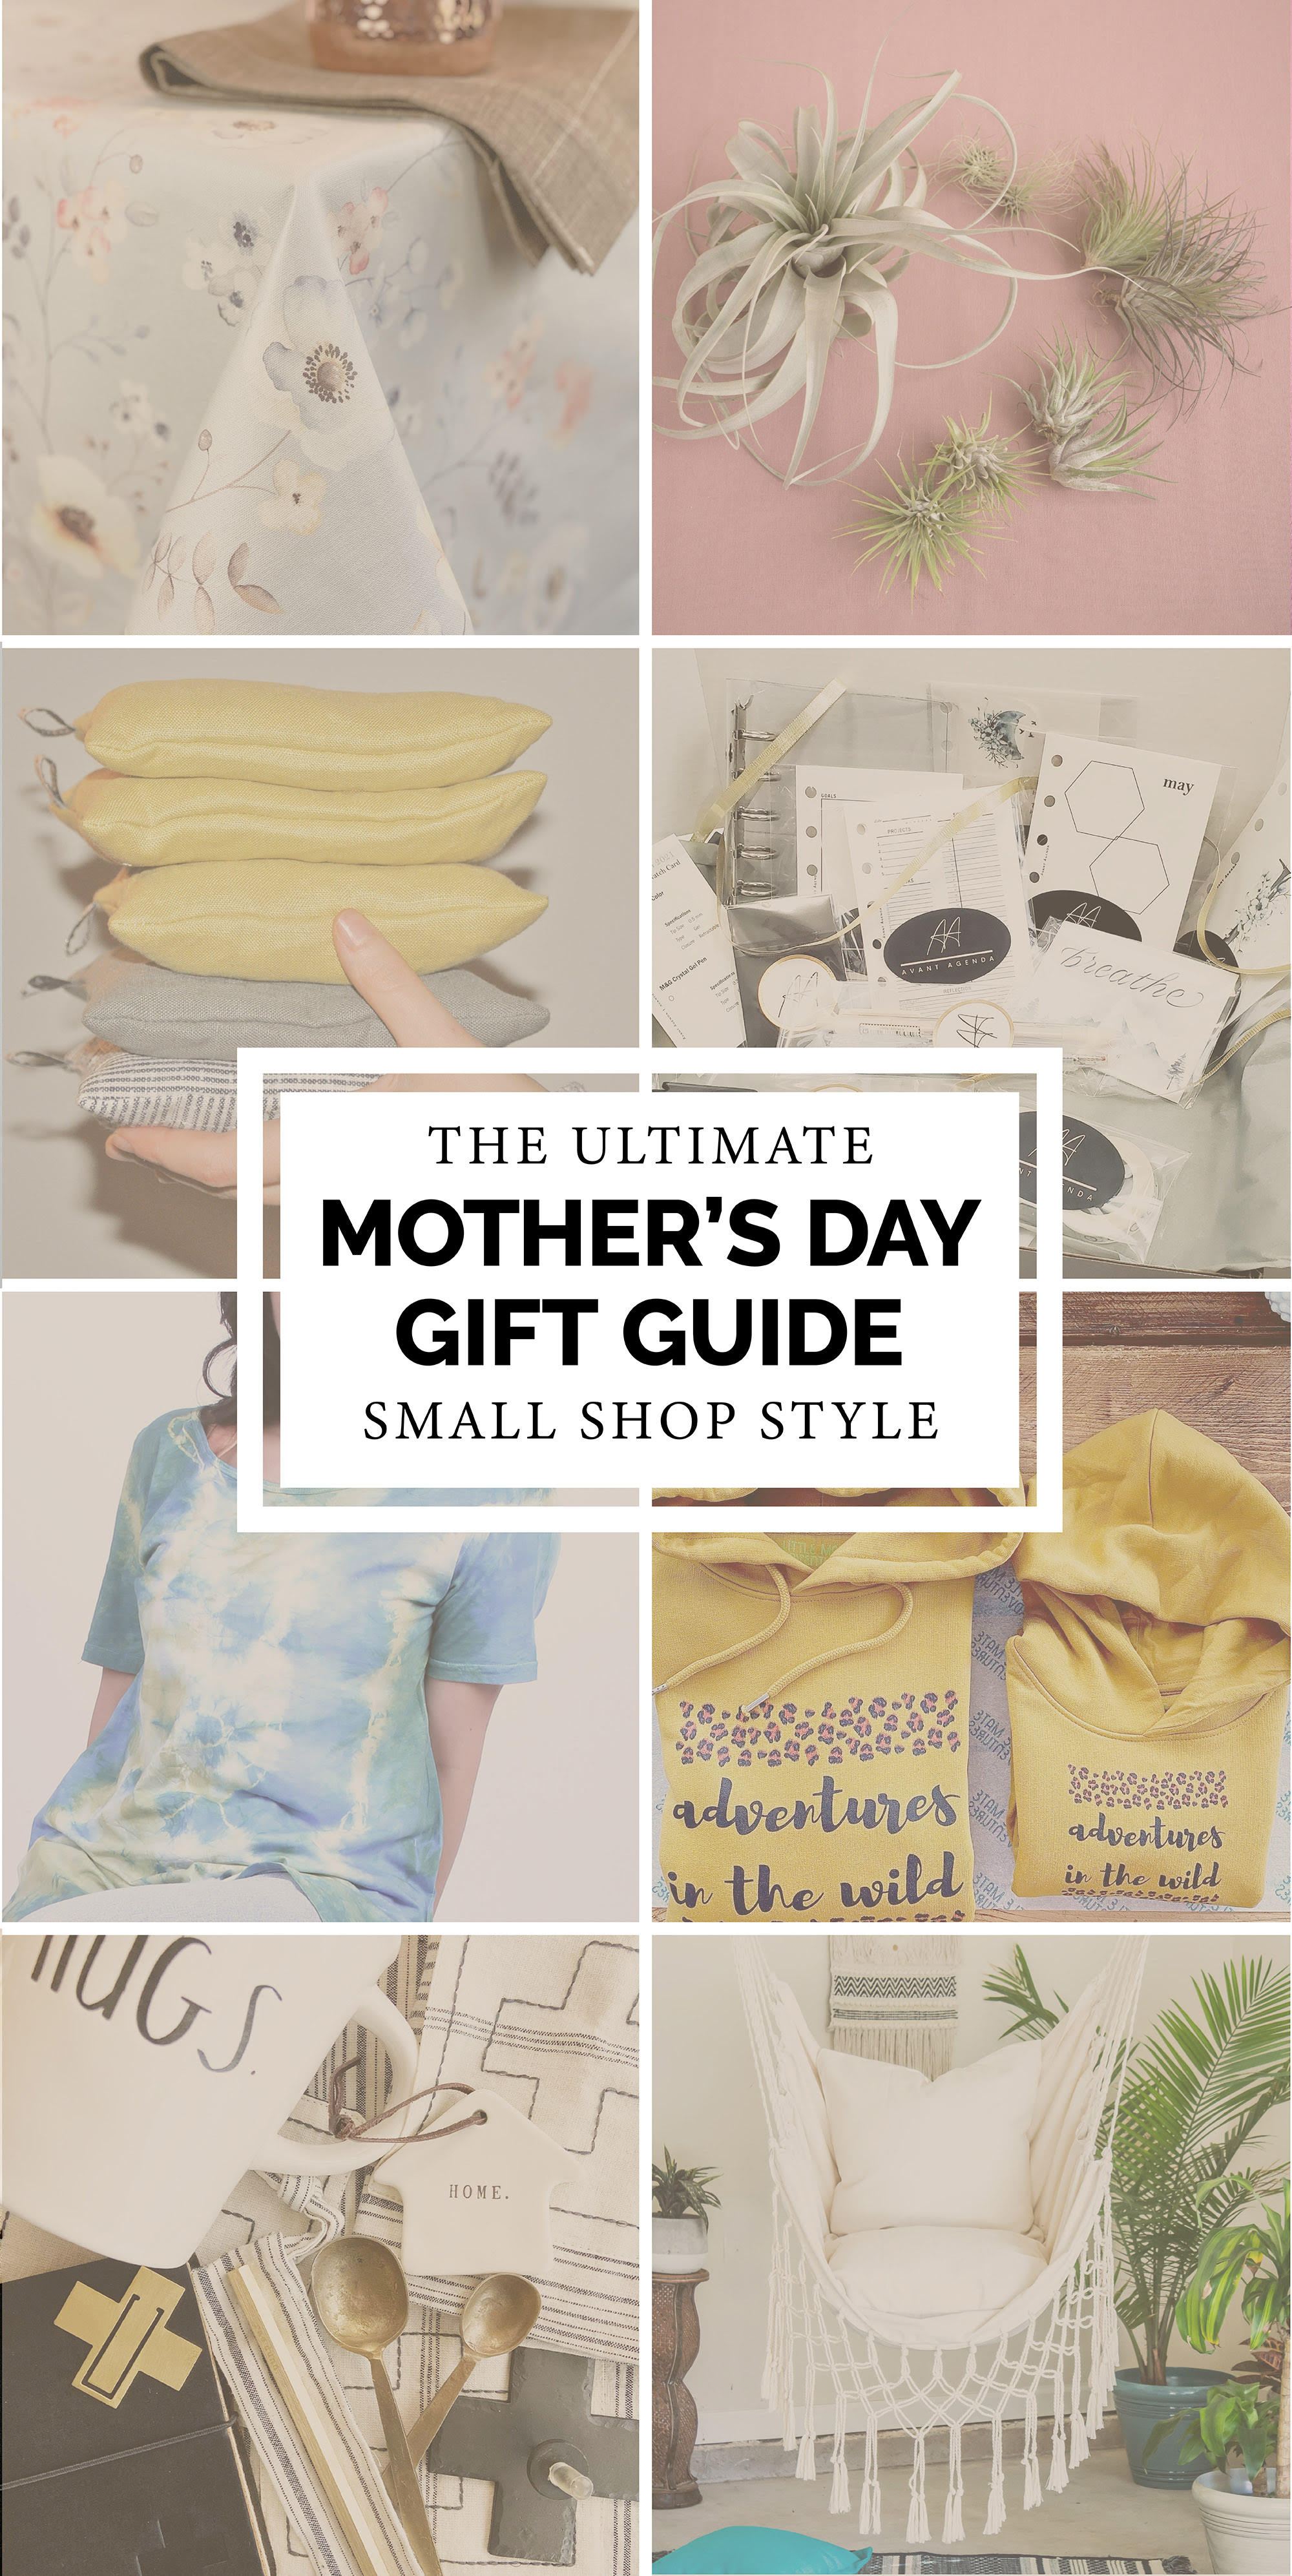 THE ULTIMATE MOTHER'S DAY DESIGNER BAG GIFT GUIDE - The Savvy Life